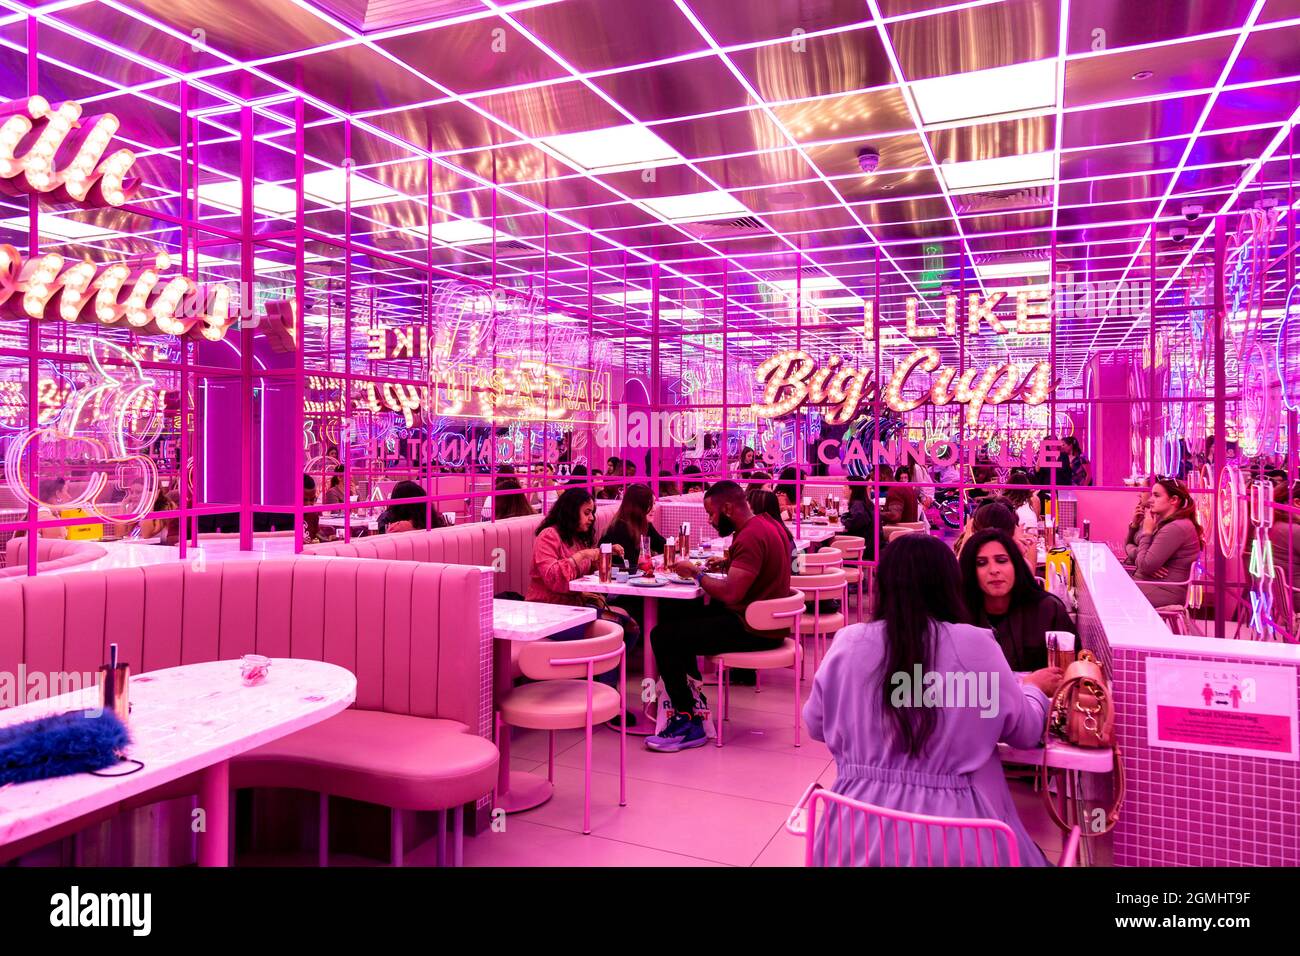 Retro mirrored pink interior with marquee light signs at EL&N Soho cafe, London, UK Stock Photo